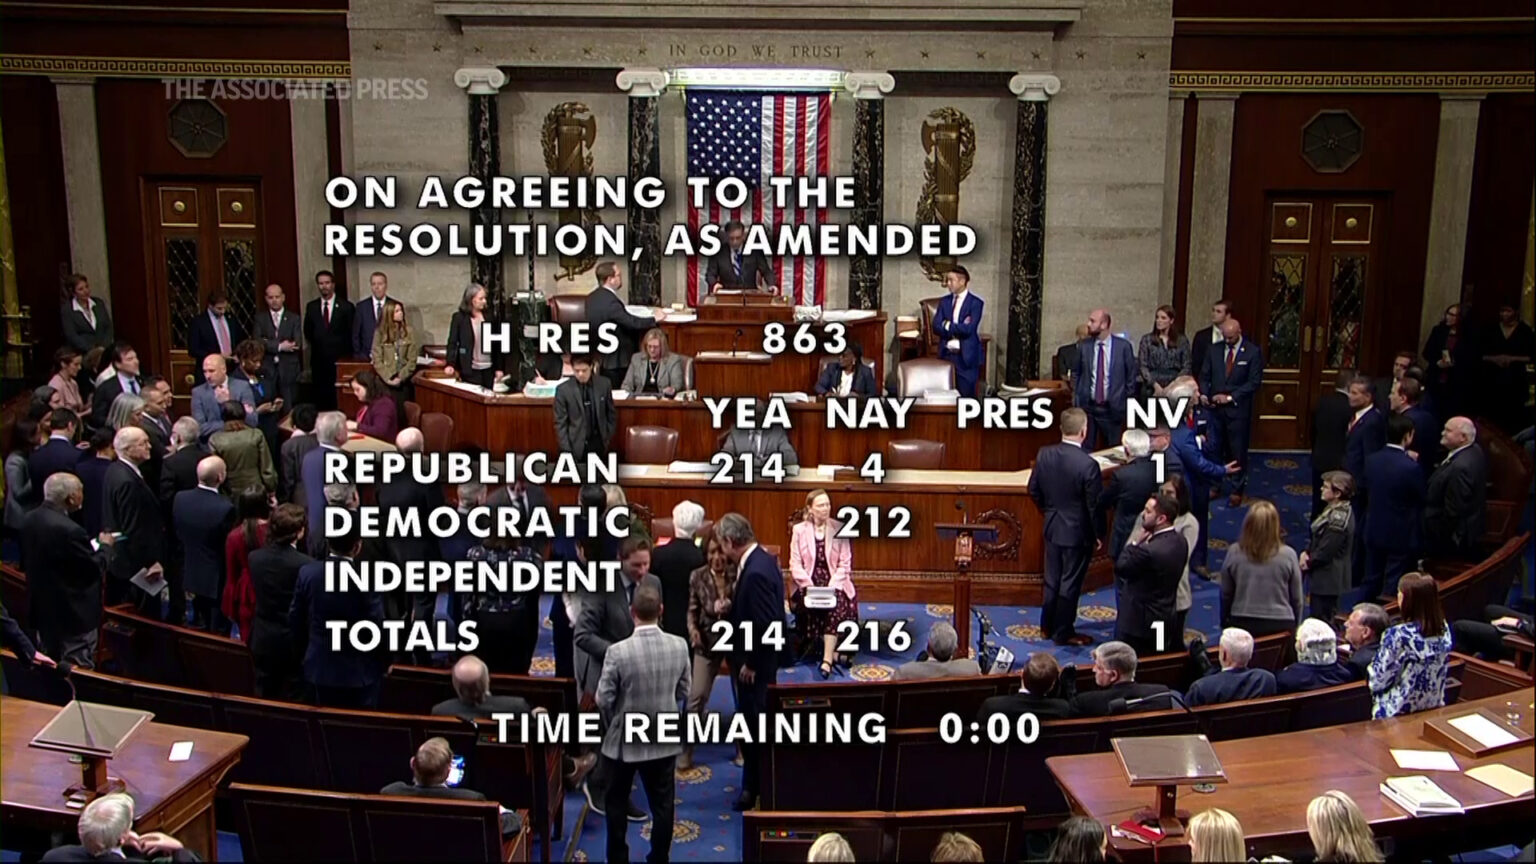 An overhead view of the U.S. House of Representatives chamber, including its legislative dais with a U.S. flag behind the Speaker's podium and curved rows of desks facing the rear wall with dais and two sets of double doors, shows multiple people standing on the floor and seated in benches, with overlaid text reading On Agreeing to the Resolution, as Amended and vote totals for Yea, Nay, Pres and NV for Republican, Democratic and Independent members.